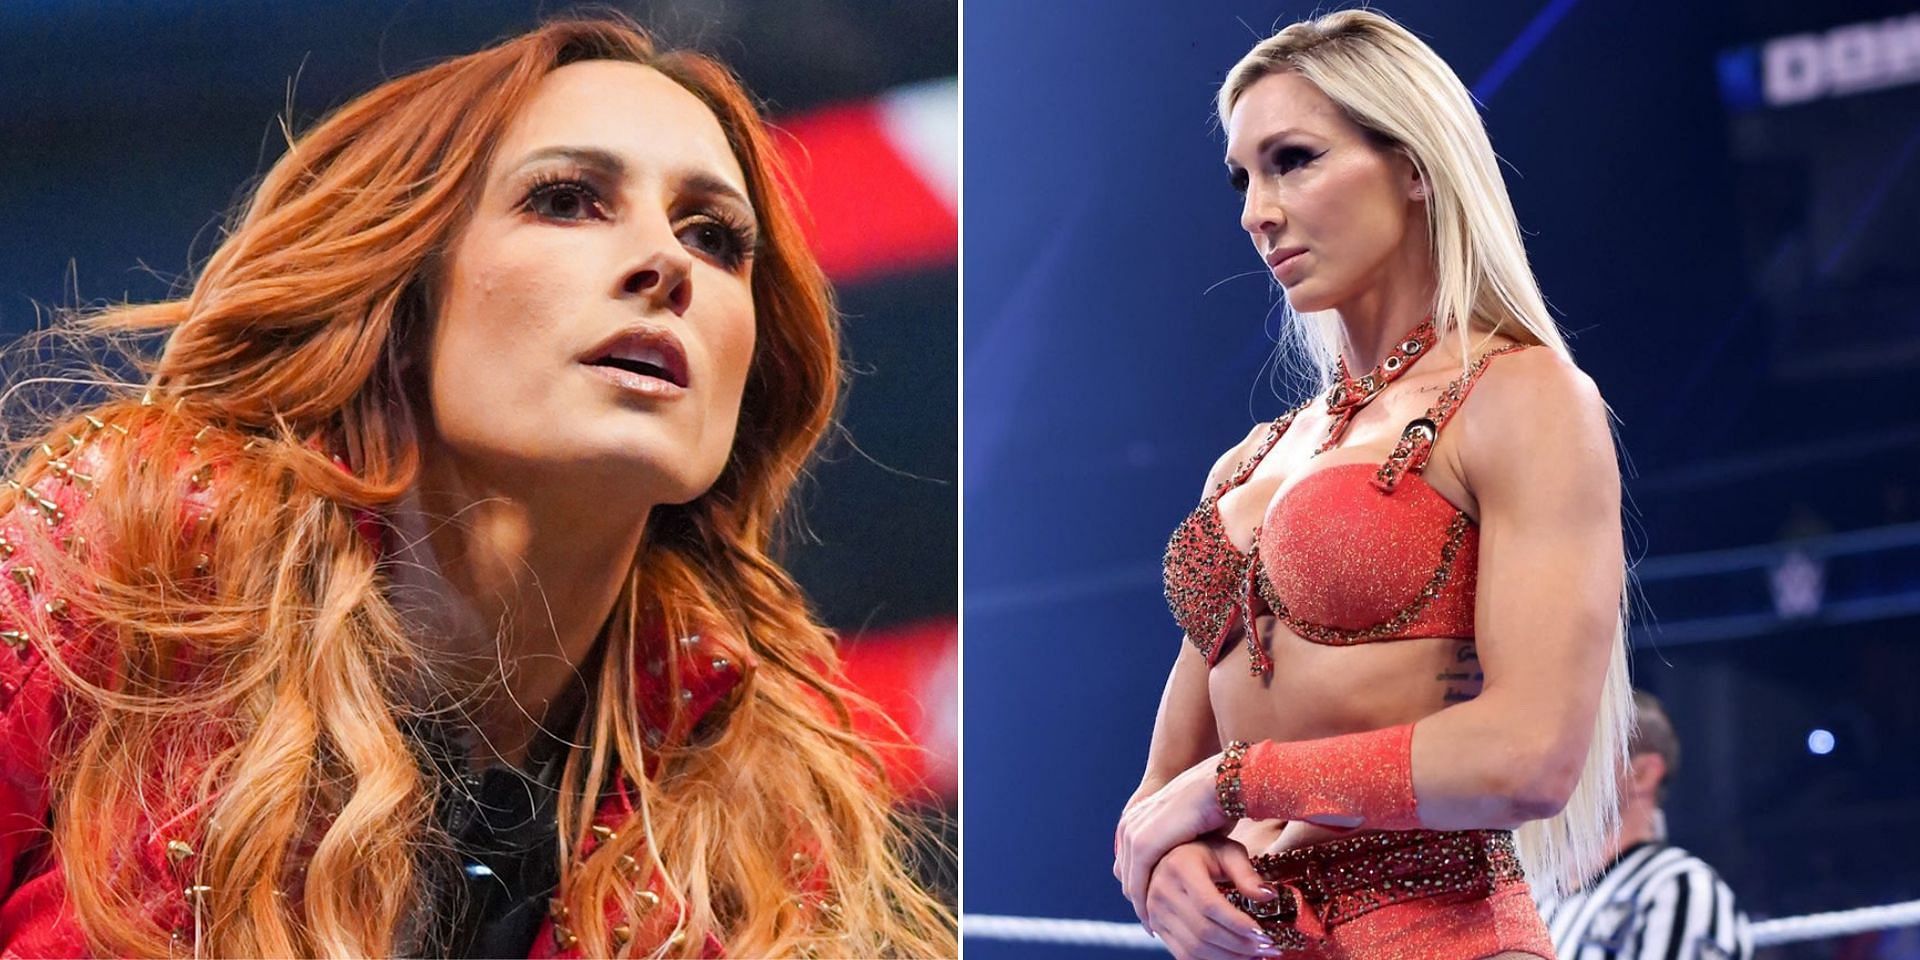 Becky Lynch and Charlotte Flair had a subtle throwback moment on SmackDown